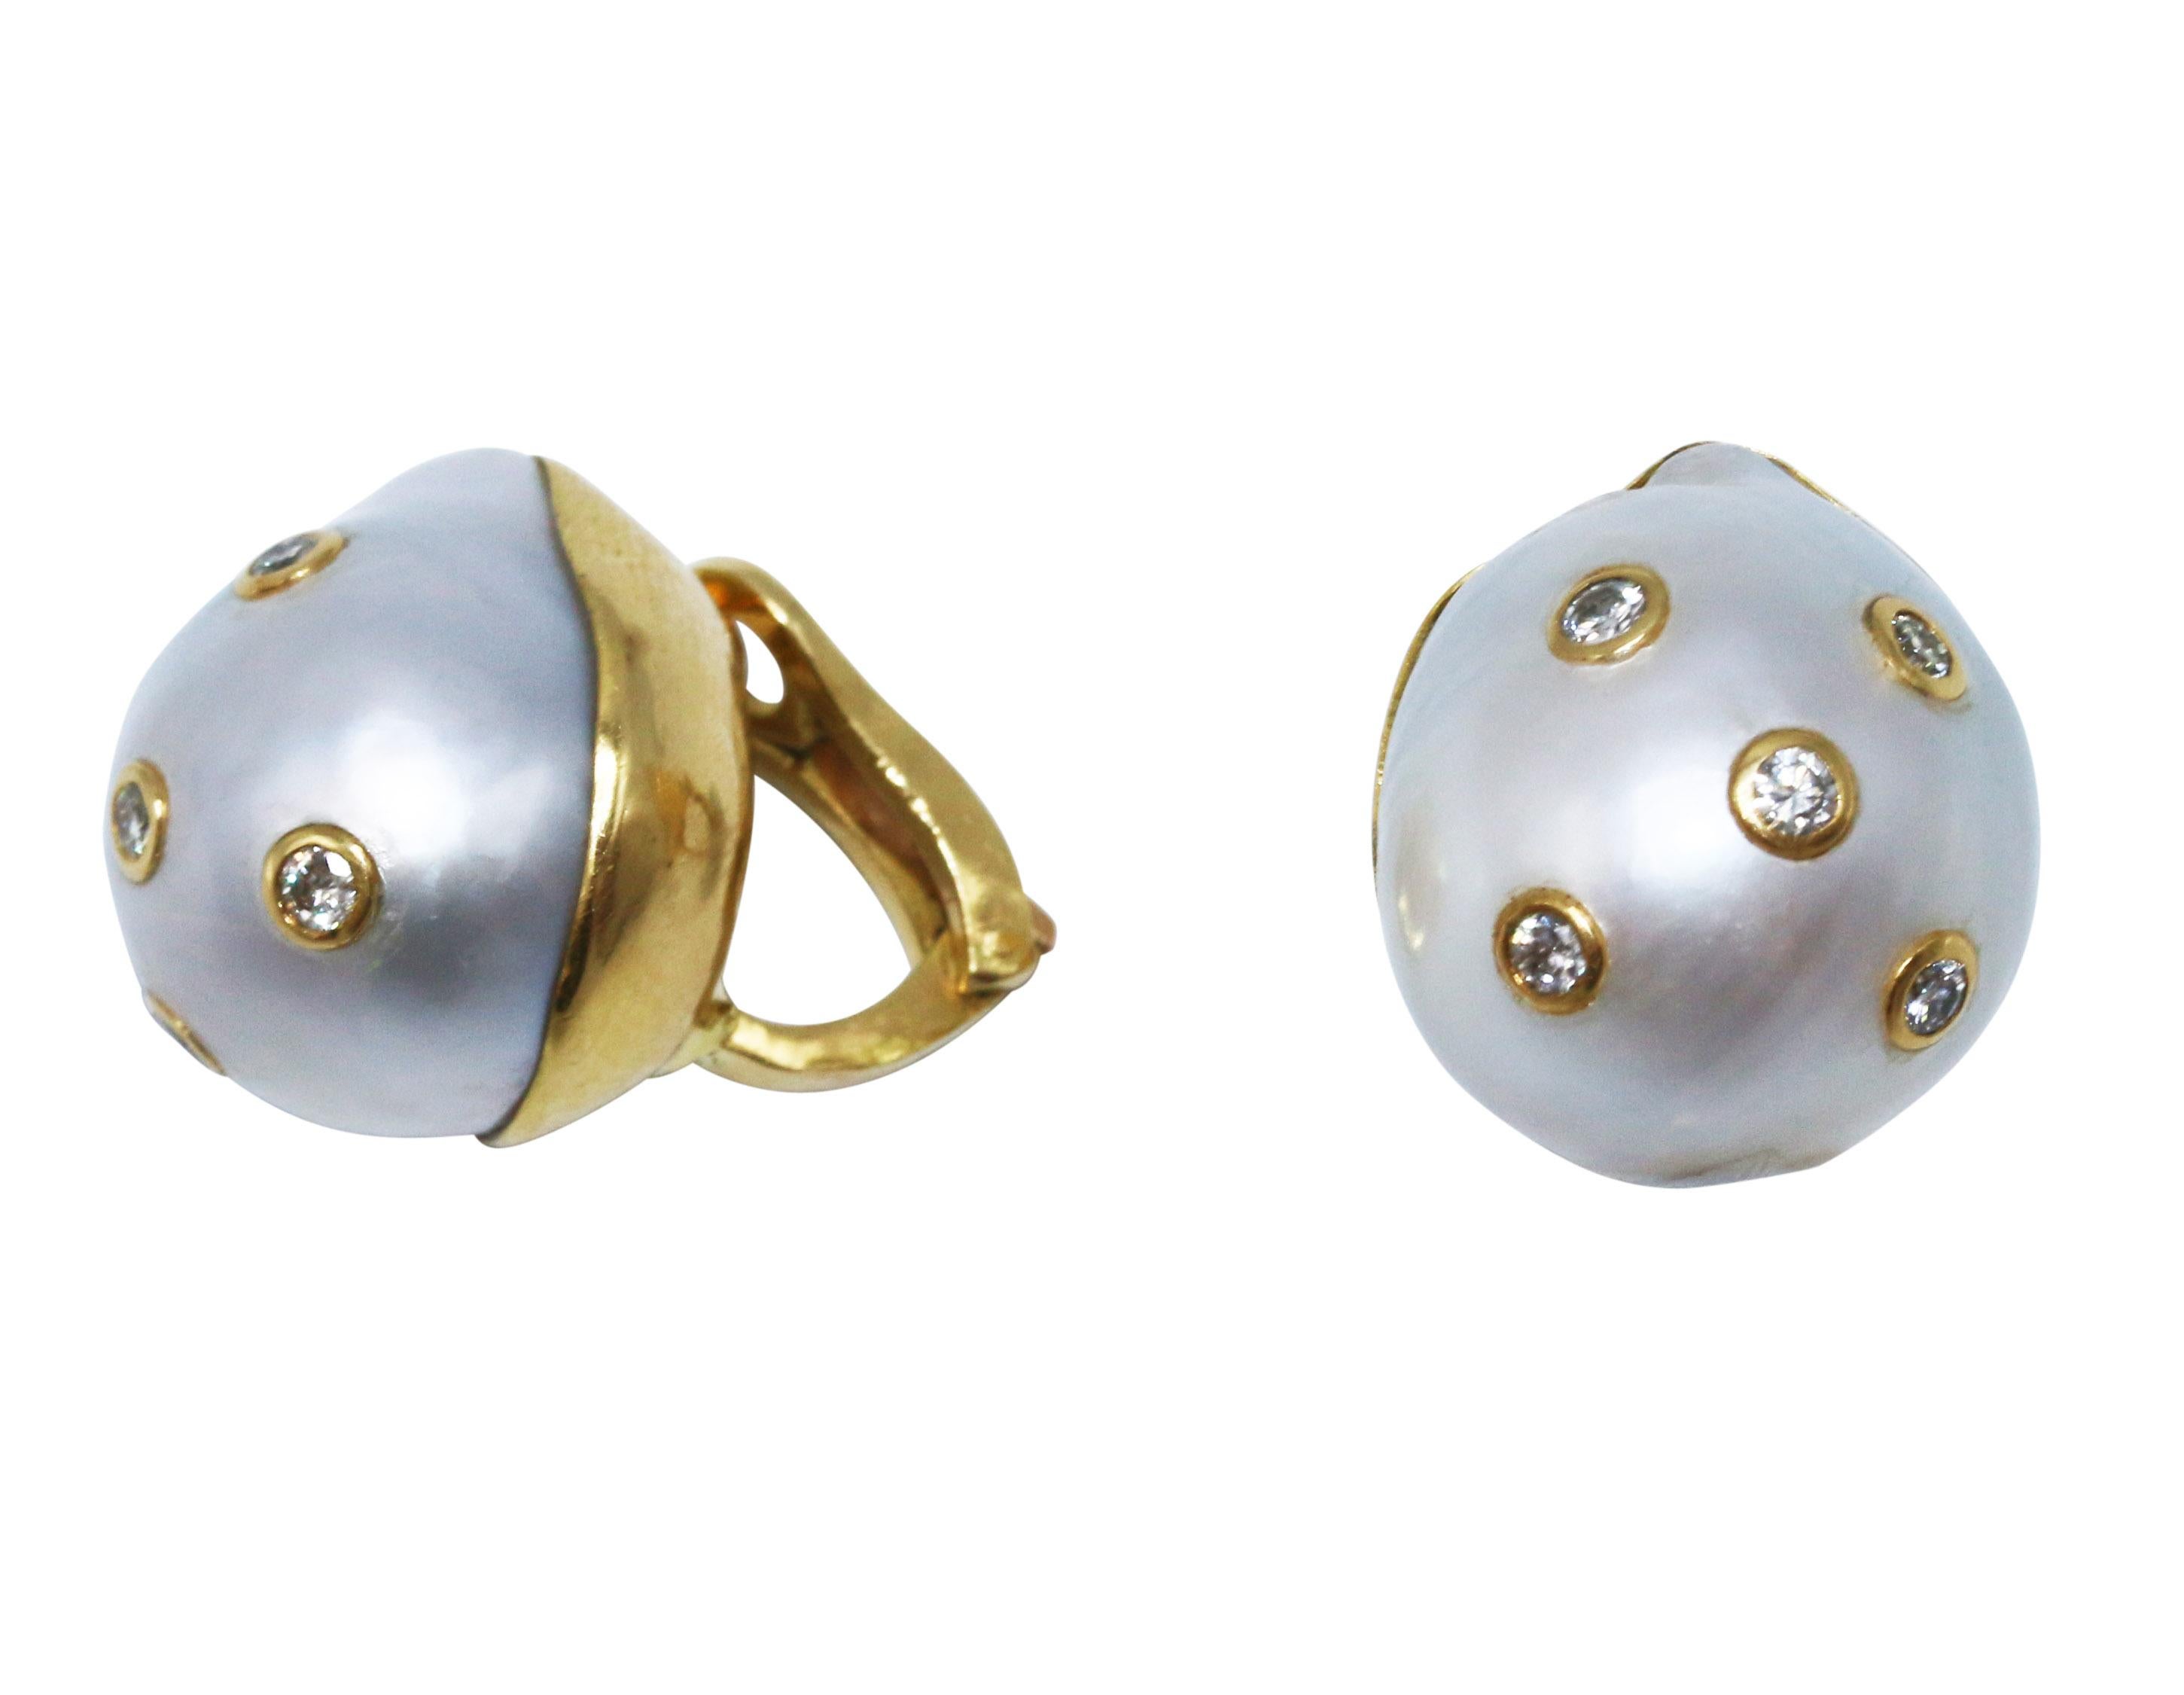 Pair of 18 karat yellow gold, baroque pearl and diamond earclips, composed of two cultured baroque pearls studded with collet-set diamonds weighing approximately 0.40 carat, the pearls measuring approximately 18.4 by 16.2 mm. and 18.7 by 16.2 mm.,